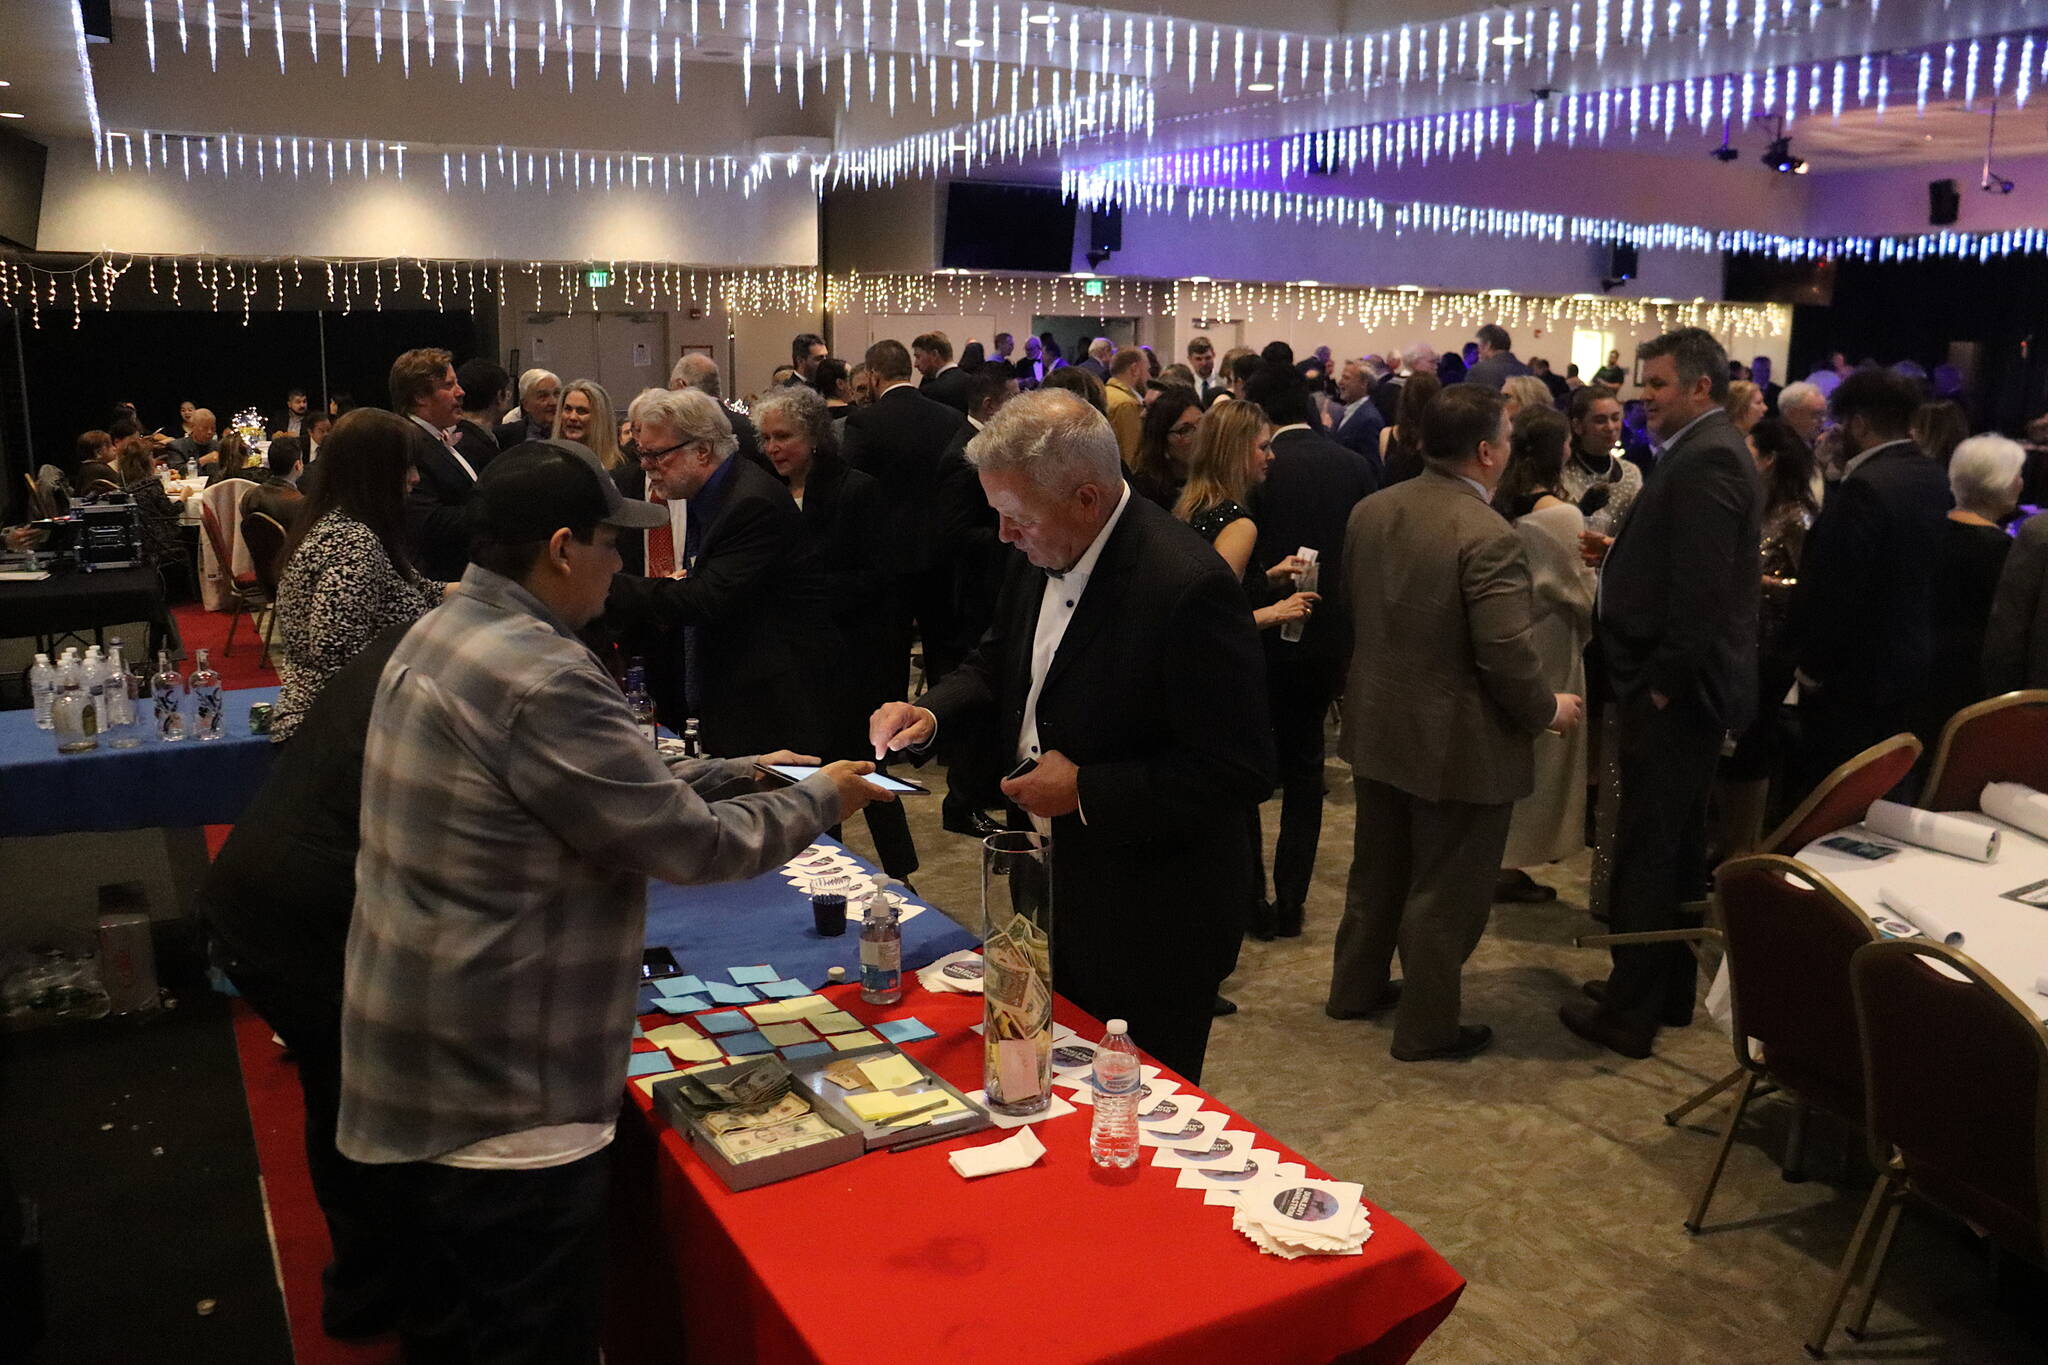 About 265 guests fill the ballroom at Elizabeth Peratrovich Hall for inaugural celebration of Gov. Mike Dunleavy and Lt. Gov. Nancy Dahlstrom on Friday night. (Mark Sabbatini / Juneau Empire)